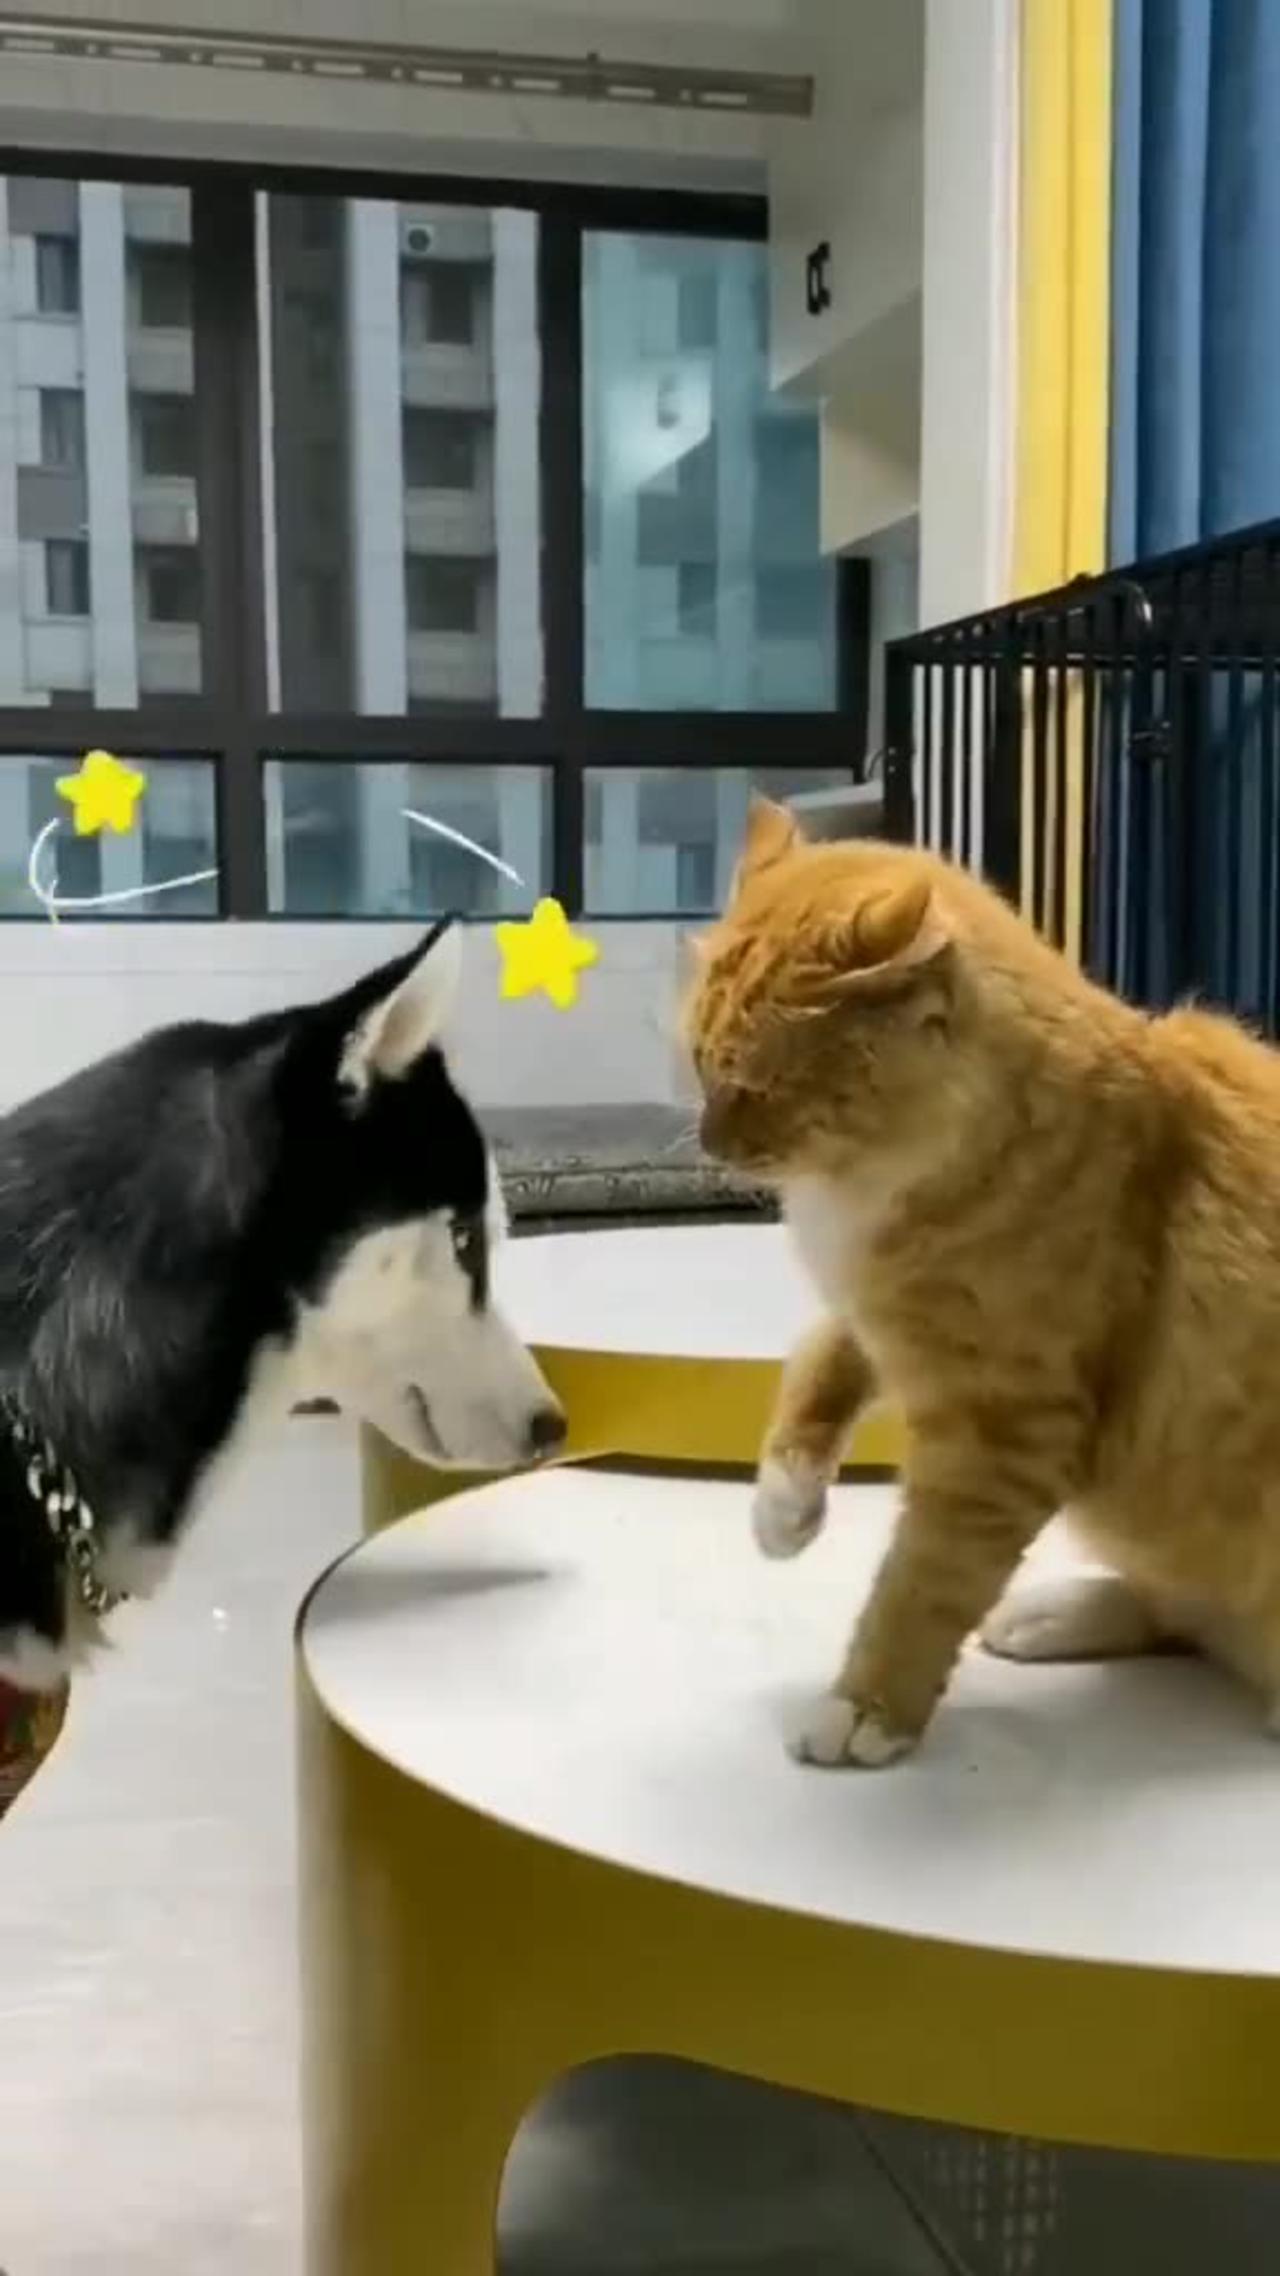 Funny video of my Cat and Dog, funny fighting in own circumstances